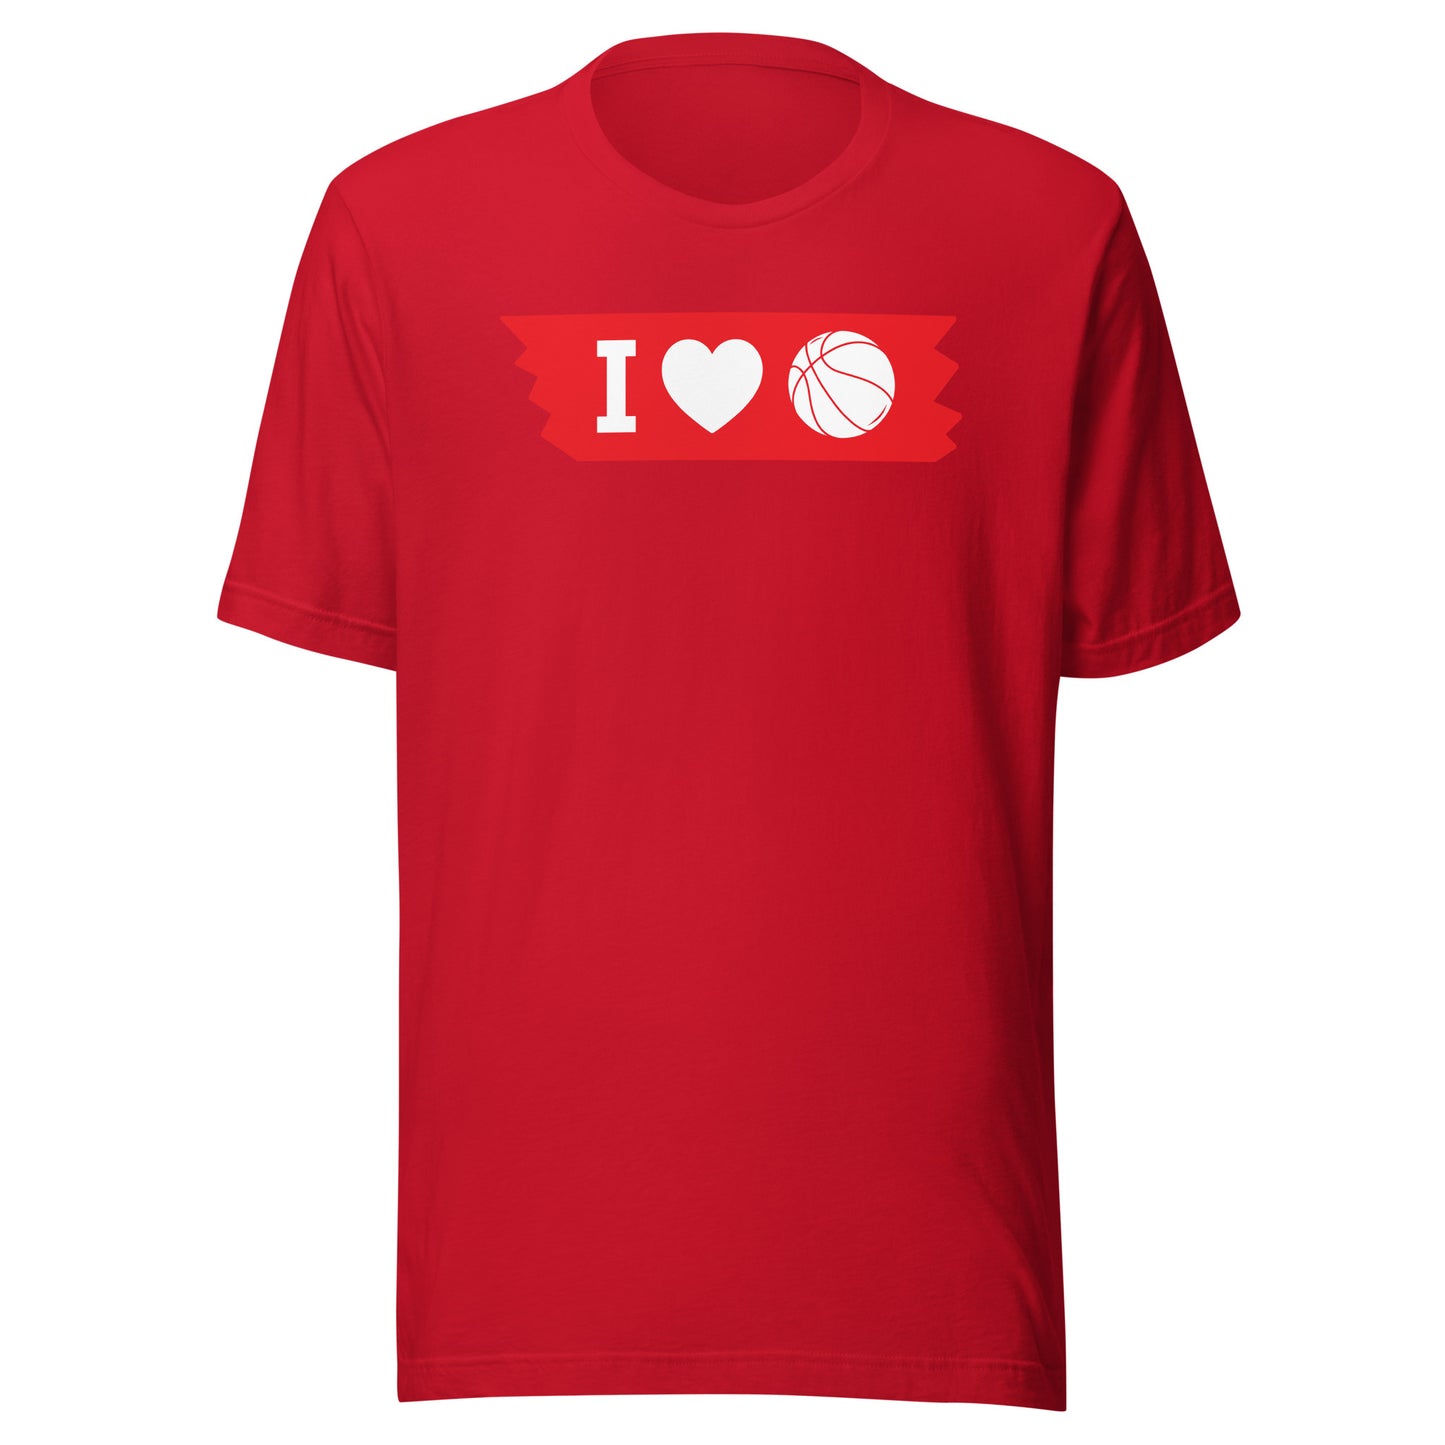 I Love Basketball T-Shirts: Show Your Passion for the Game in Style!